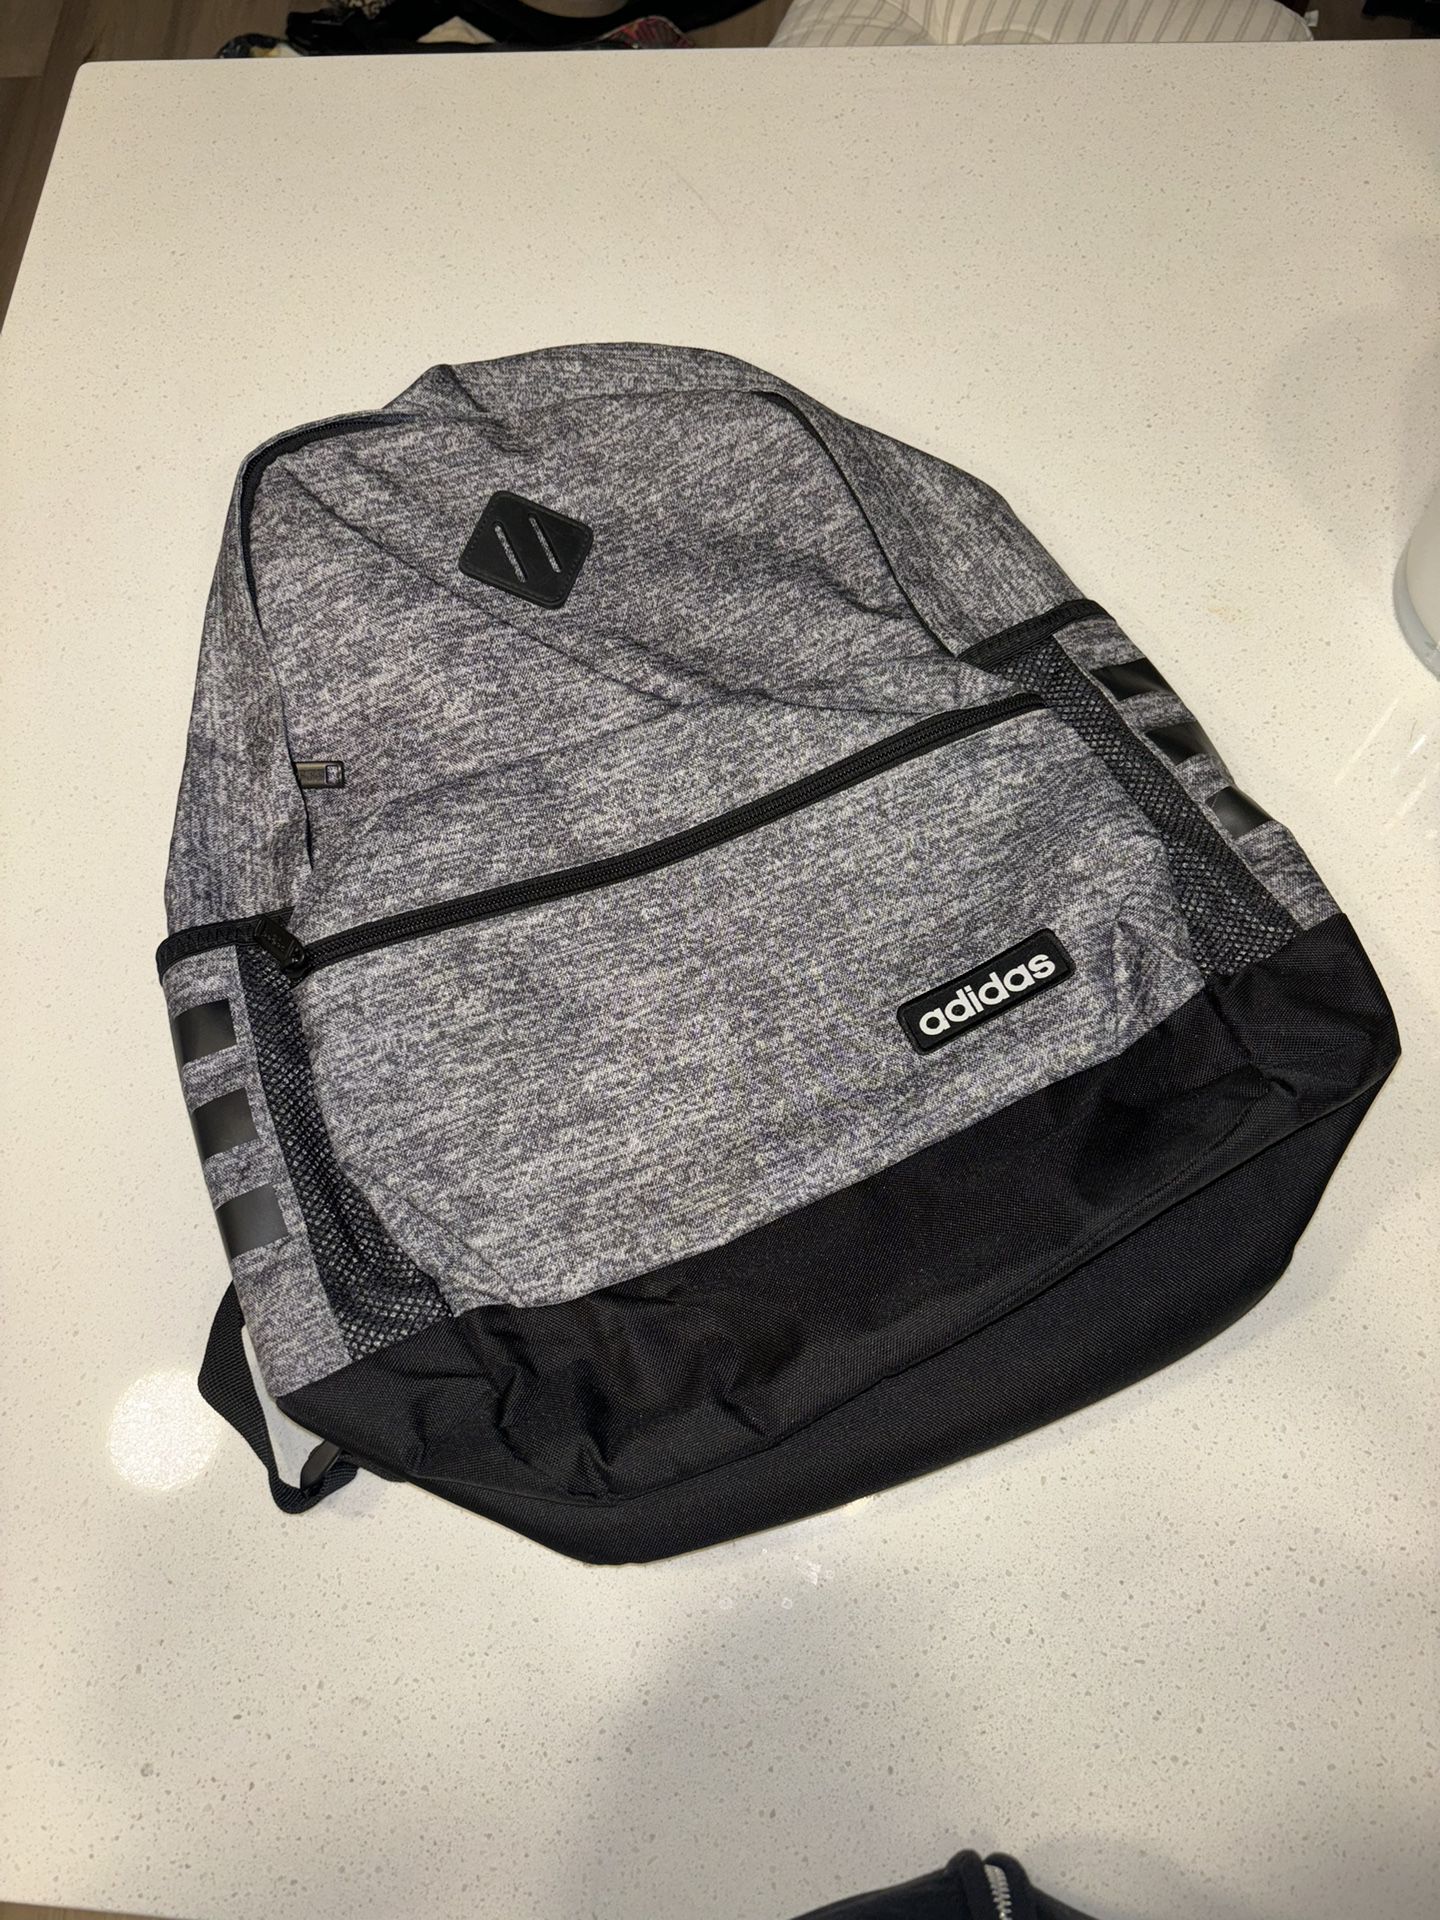 Adidas Classic 3S backpack 